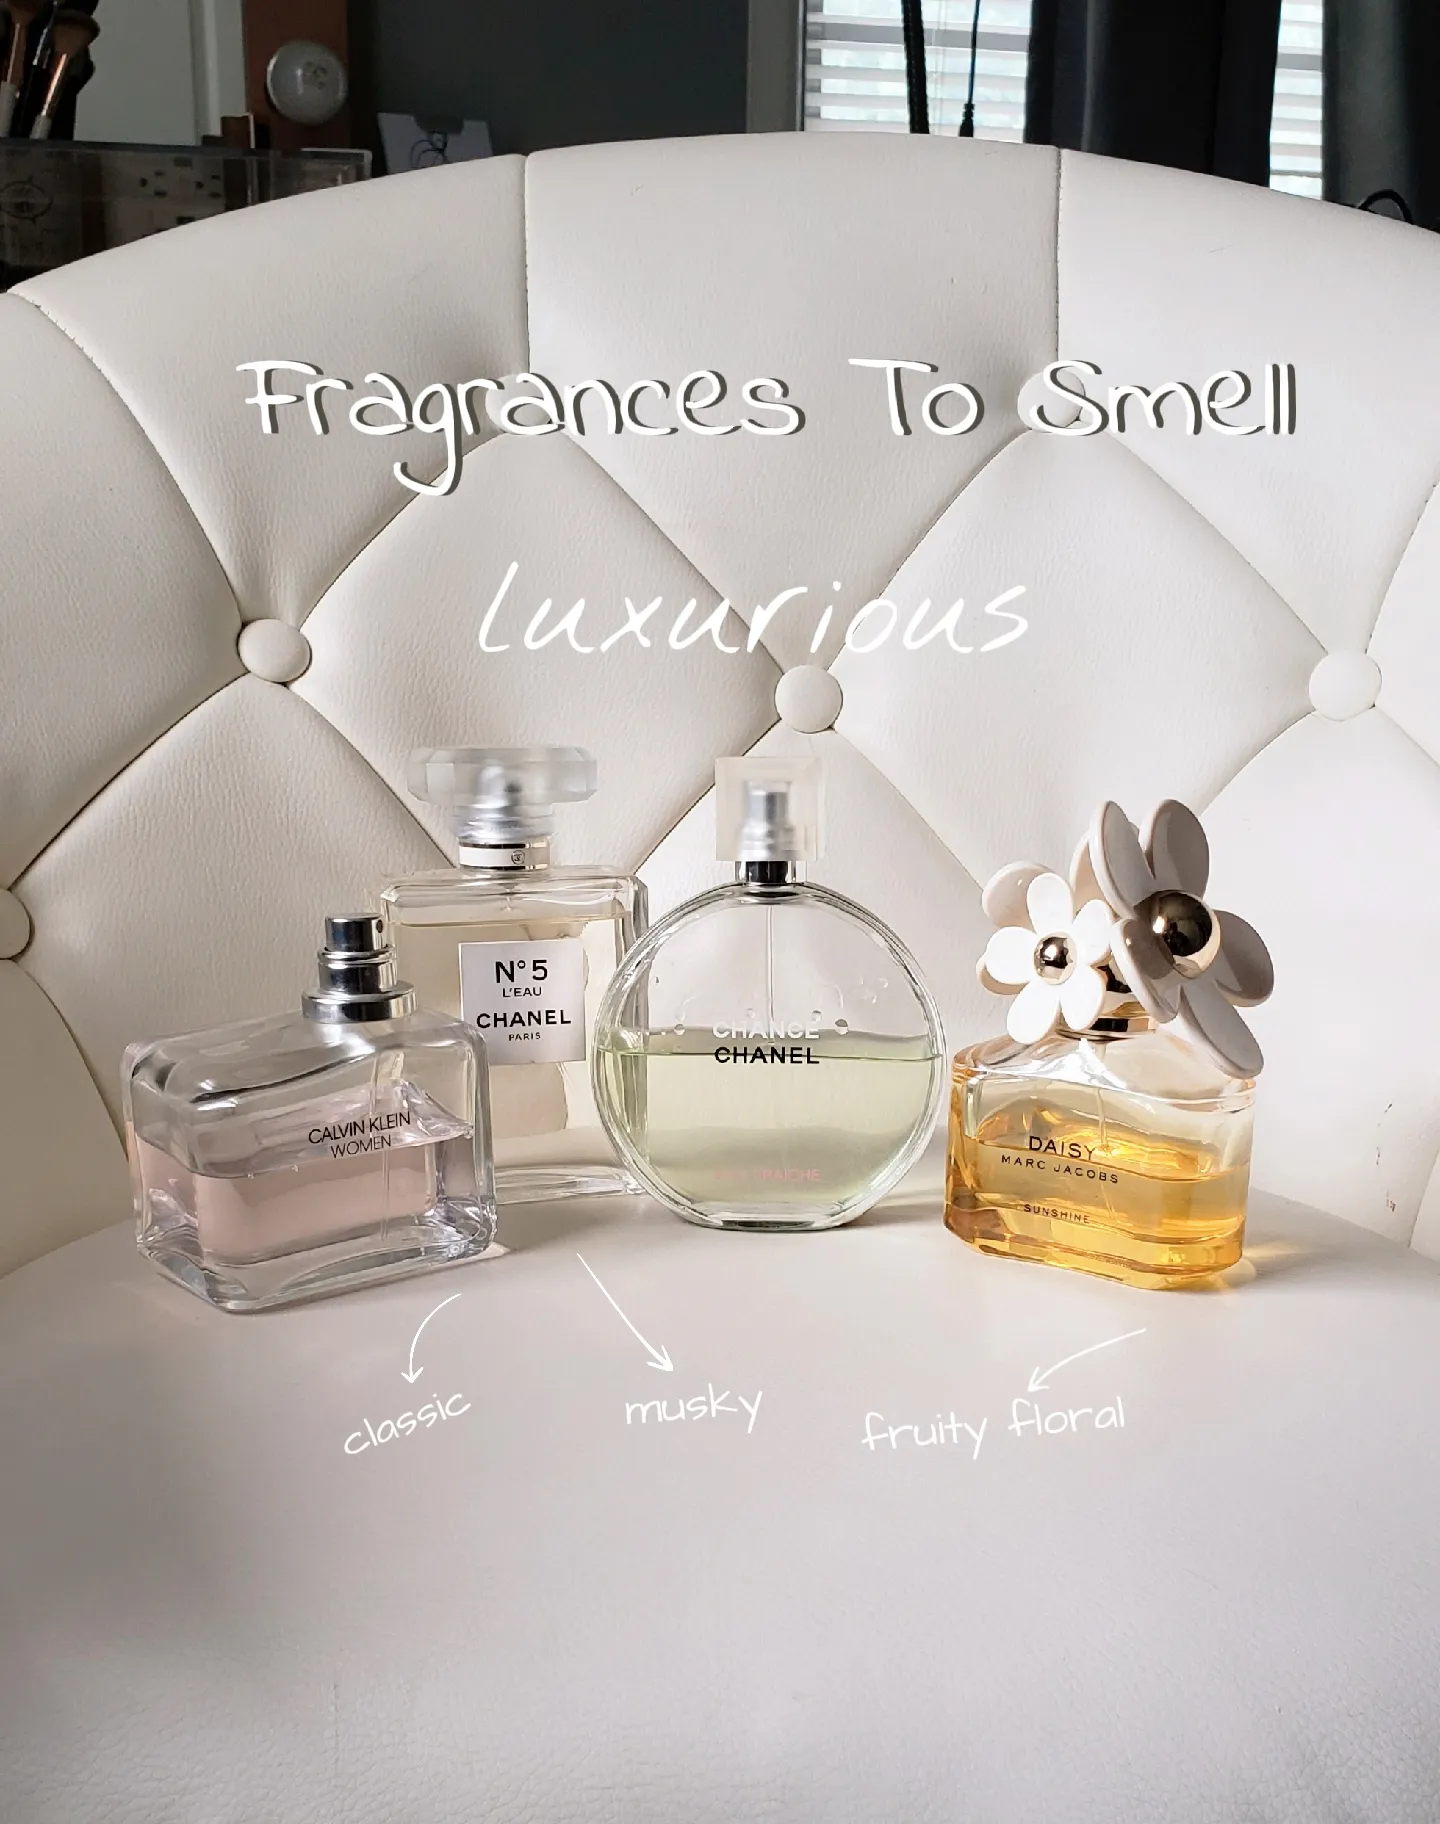 Fragrances To Smell Luxurious, Gallery posted by Shannon🌸